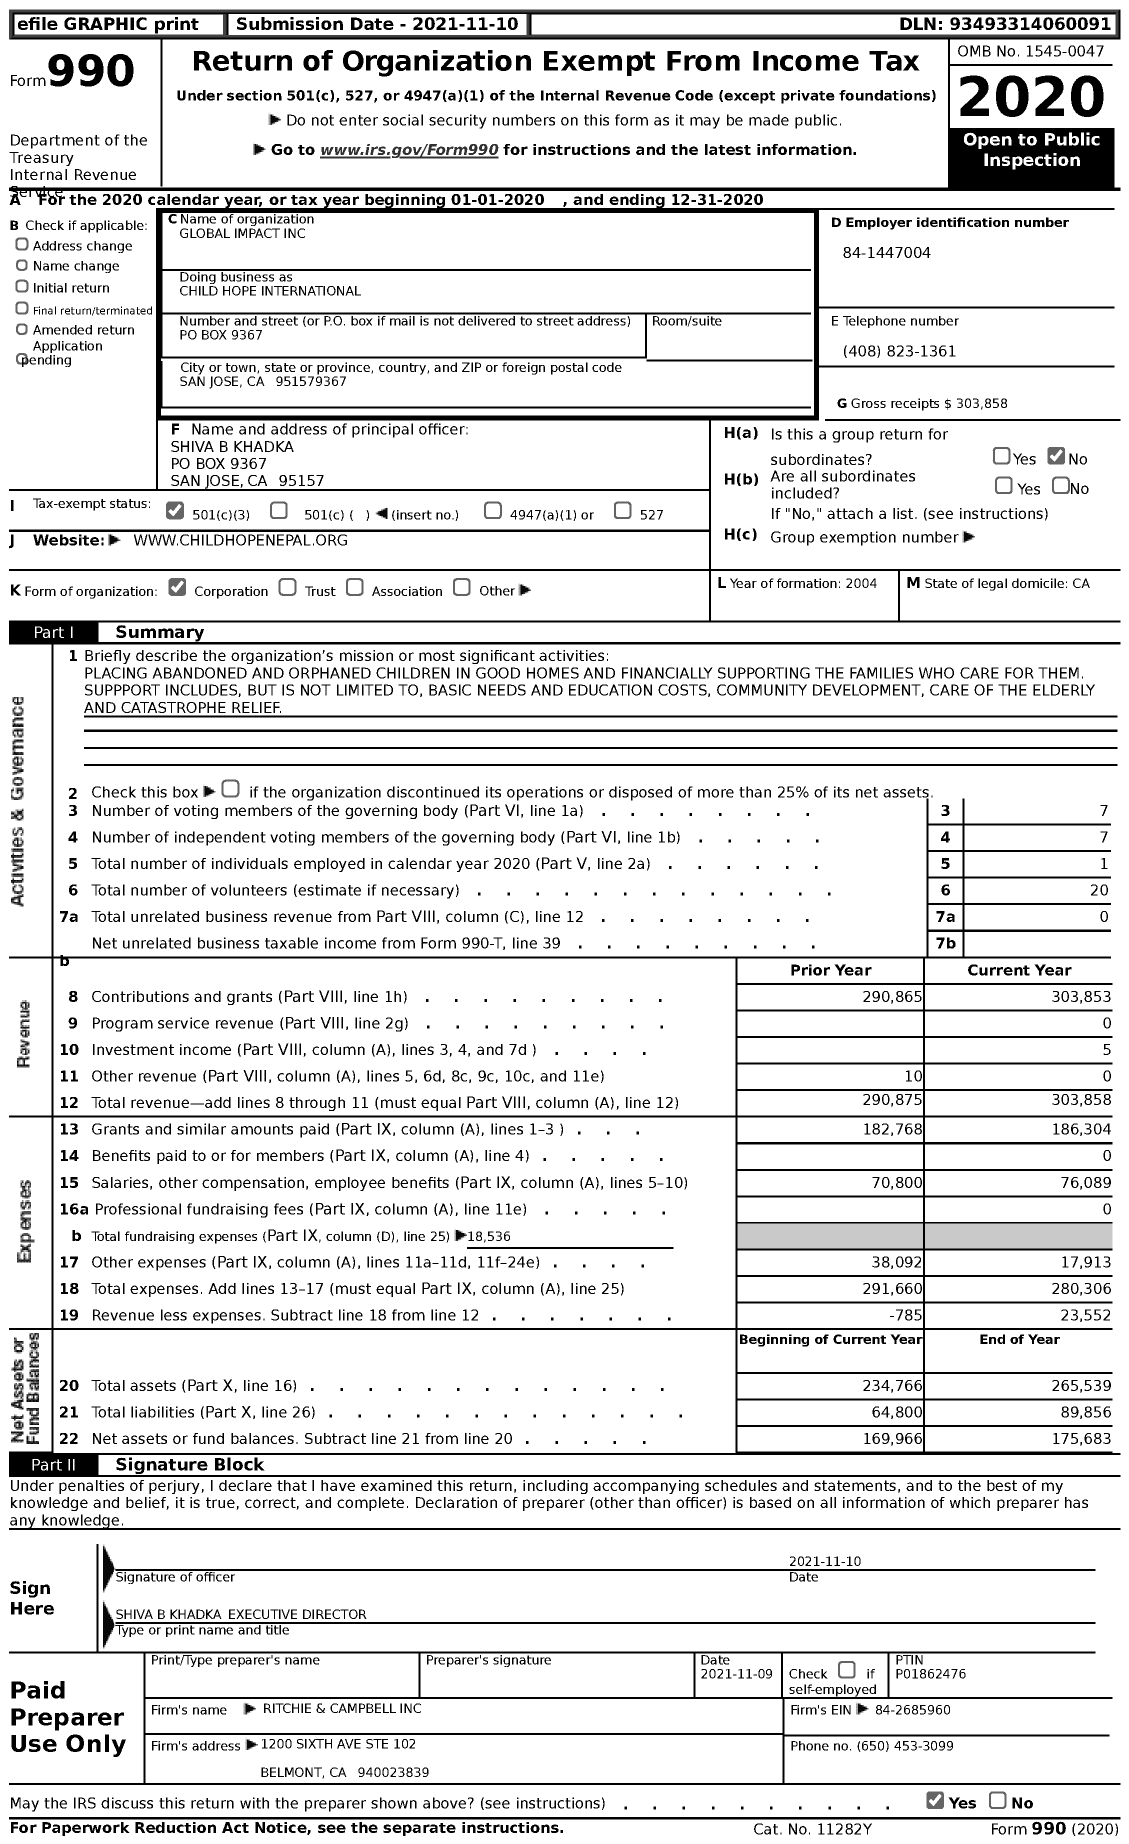 Image of first page of 2020 Form 990 for Child Hope International / Global Impact Inc